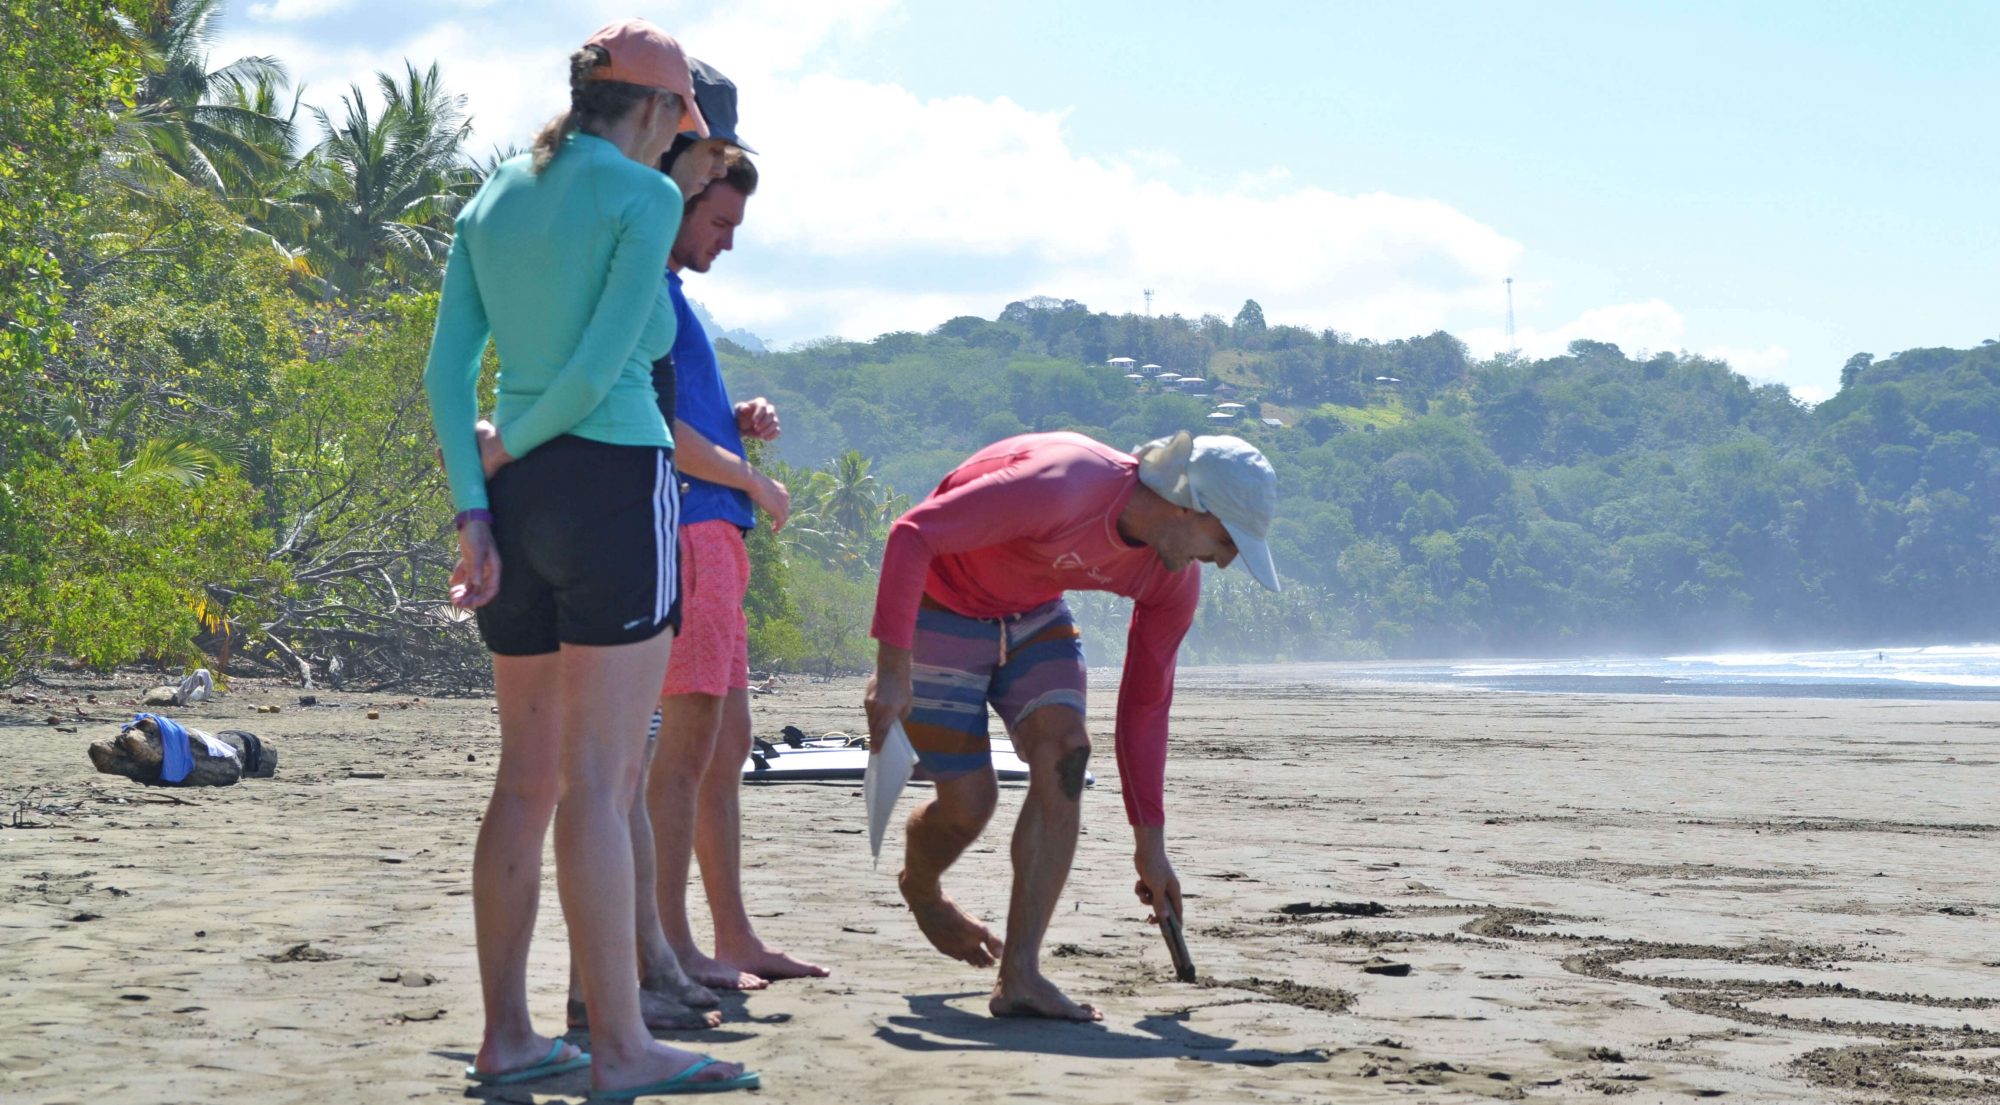 Surf students learning rules and etiquette on the beach